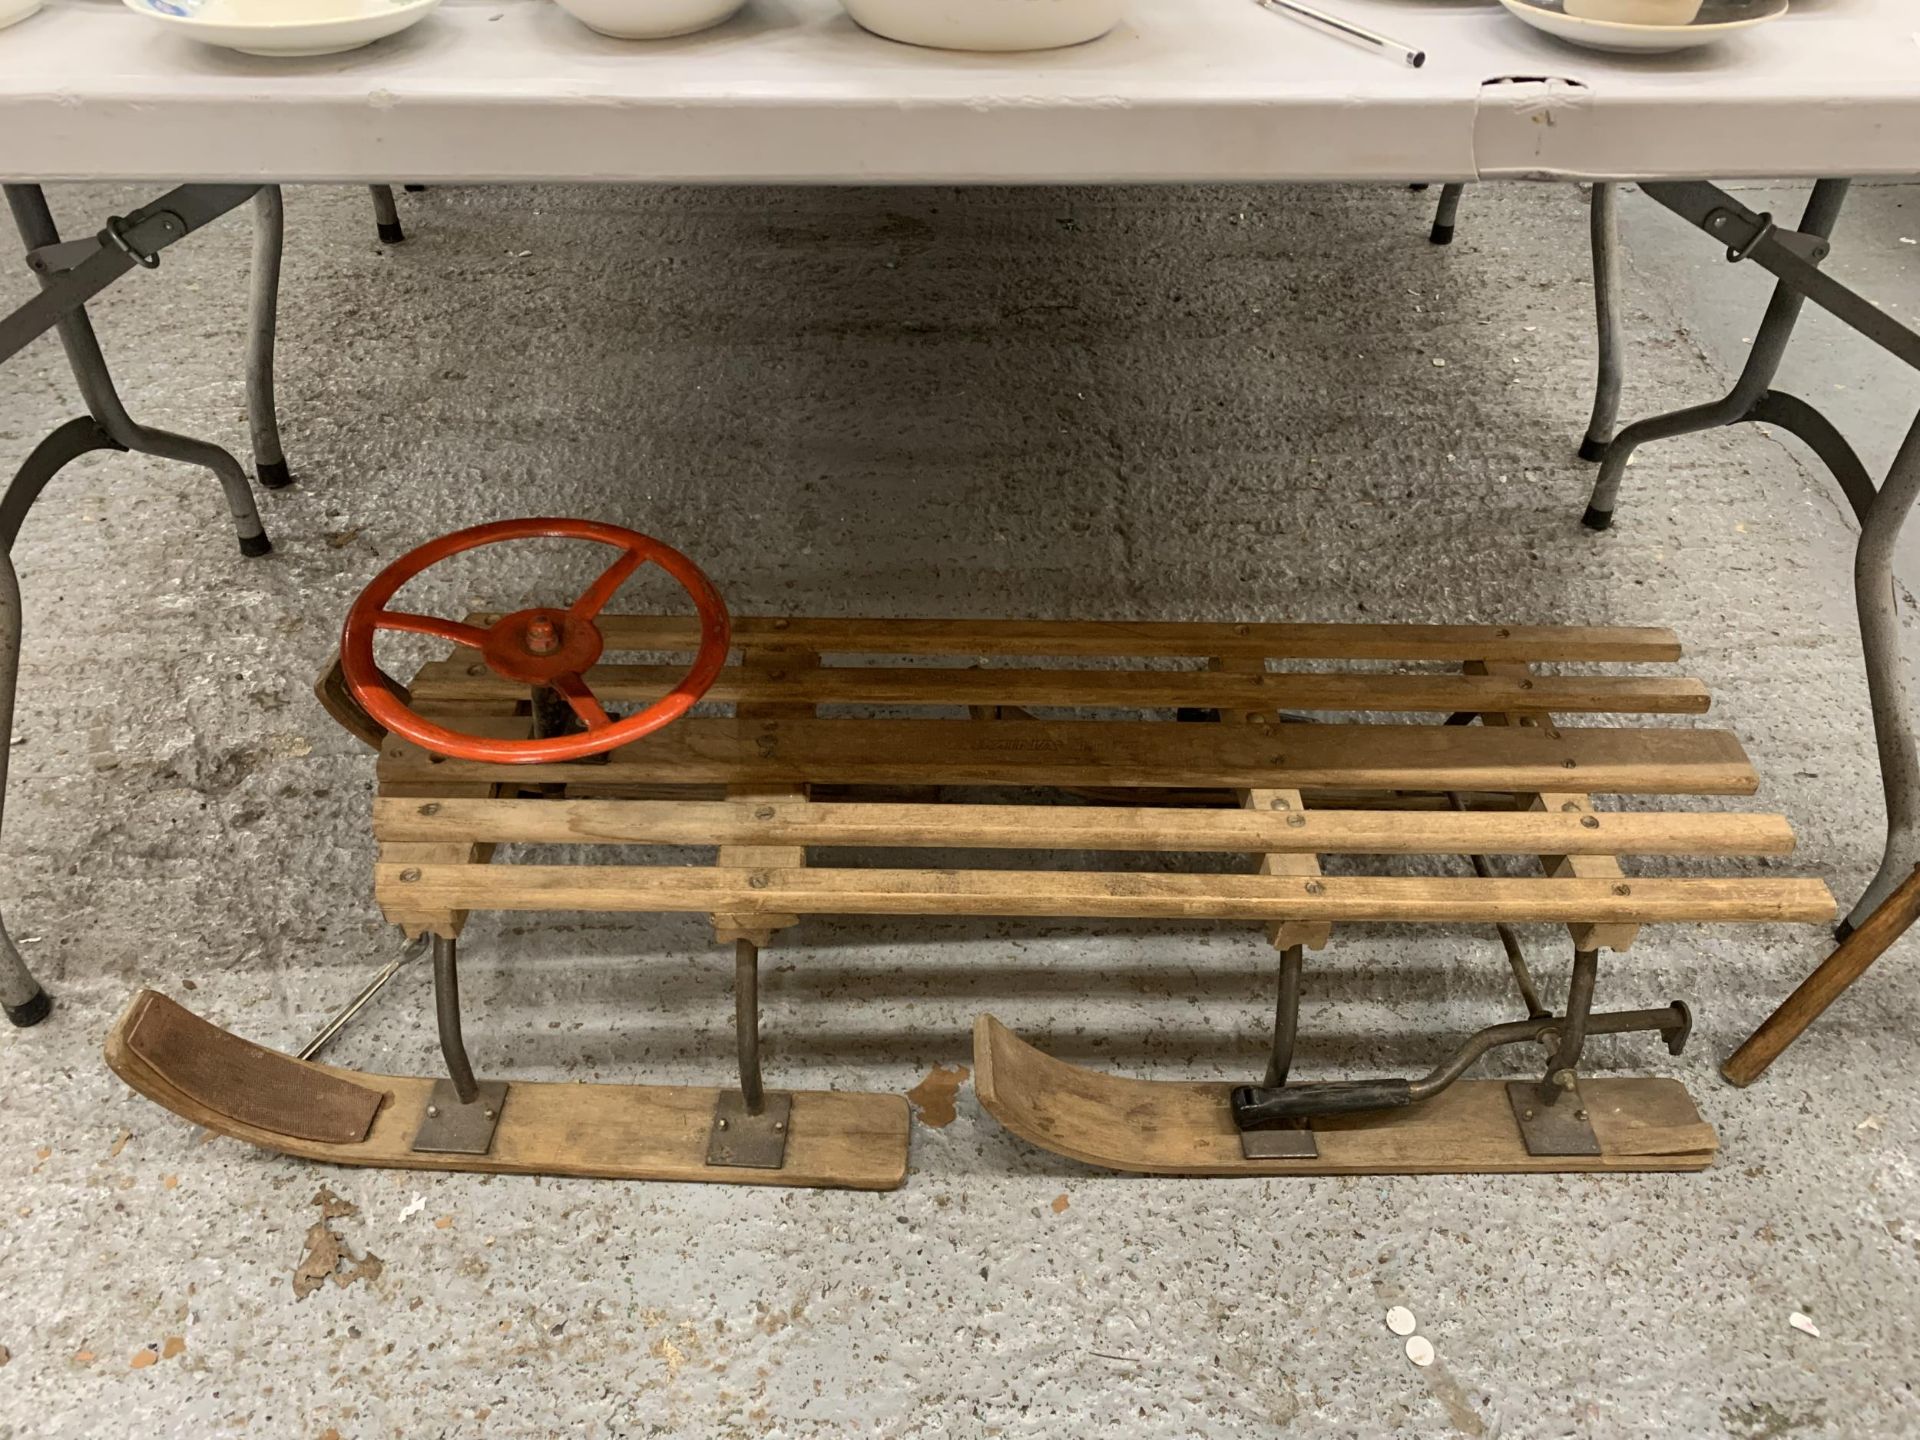 A VINTAGE WOODEN SLEDGE WITH A STEERING WHEEL